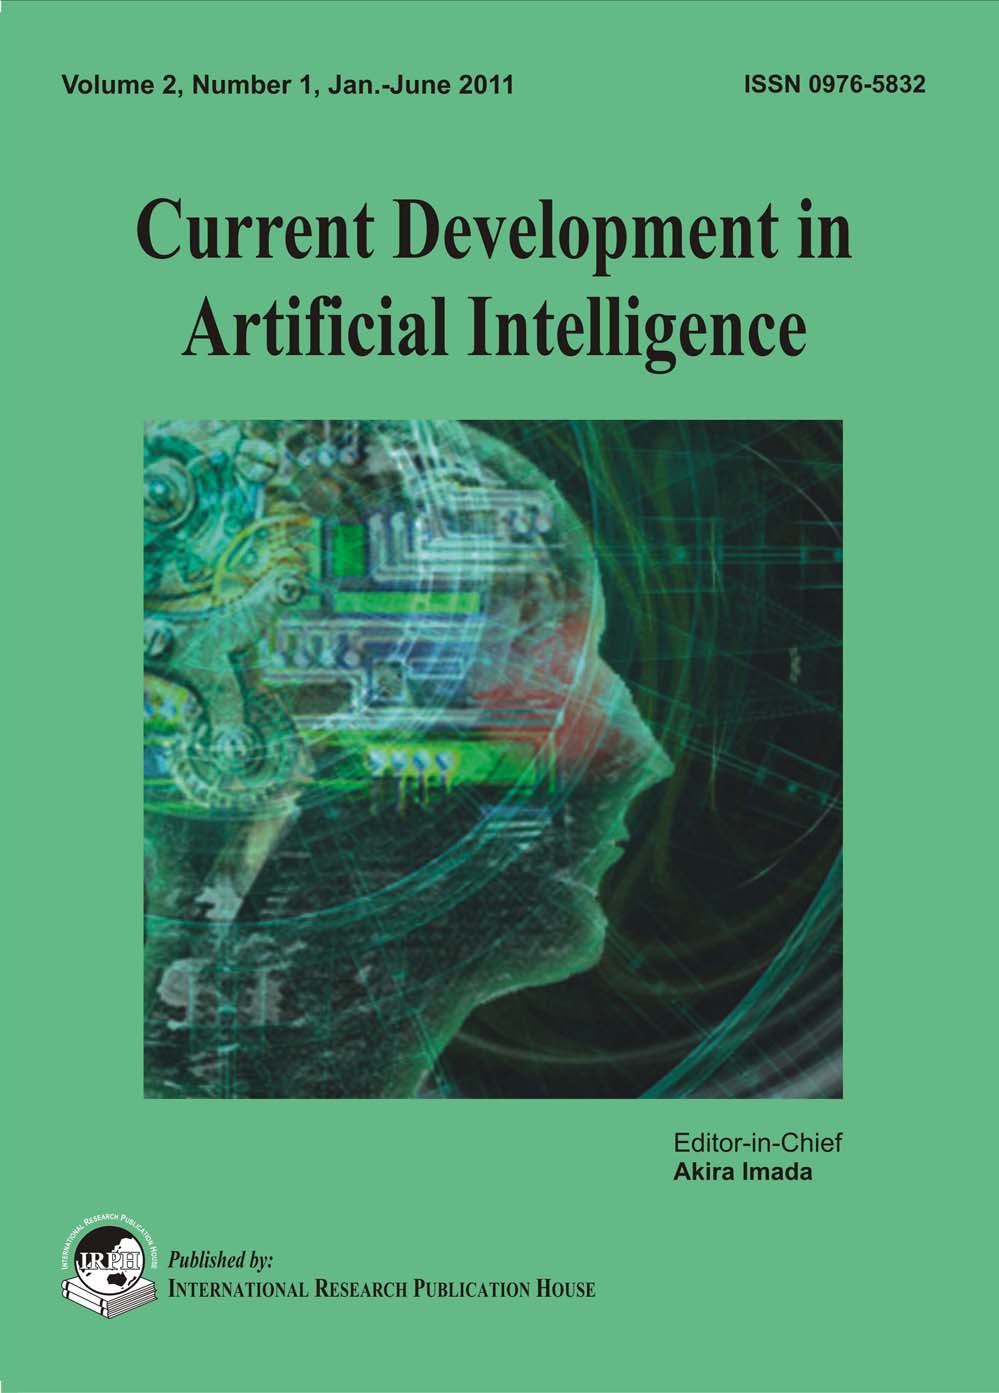 Current Development in Artificial Intelligence